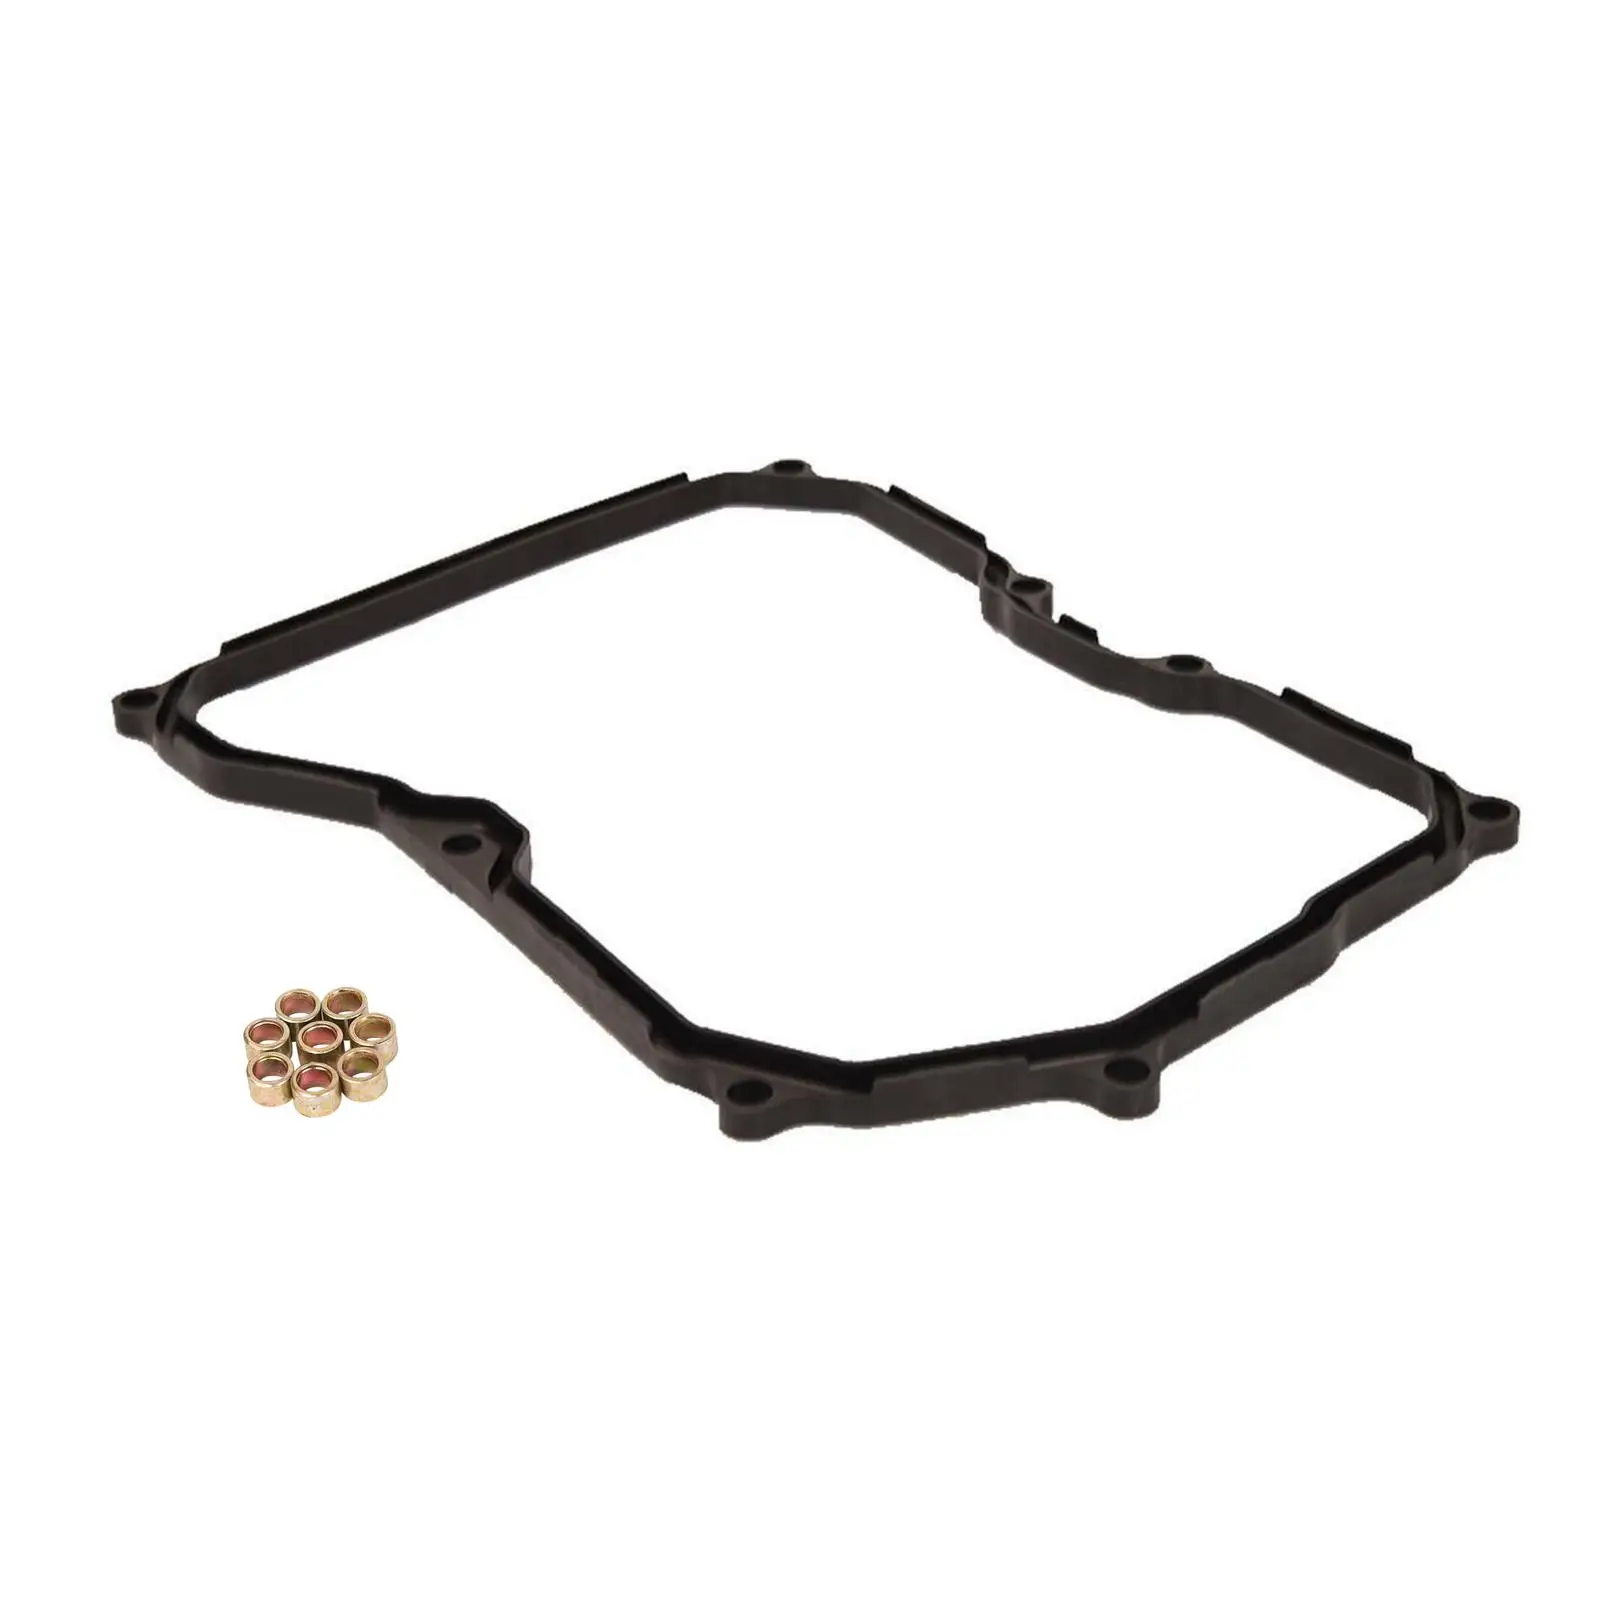 Transmission Pan Gasket Lightweight 24117566356 Fits for Mini Accessories